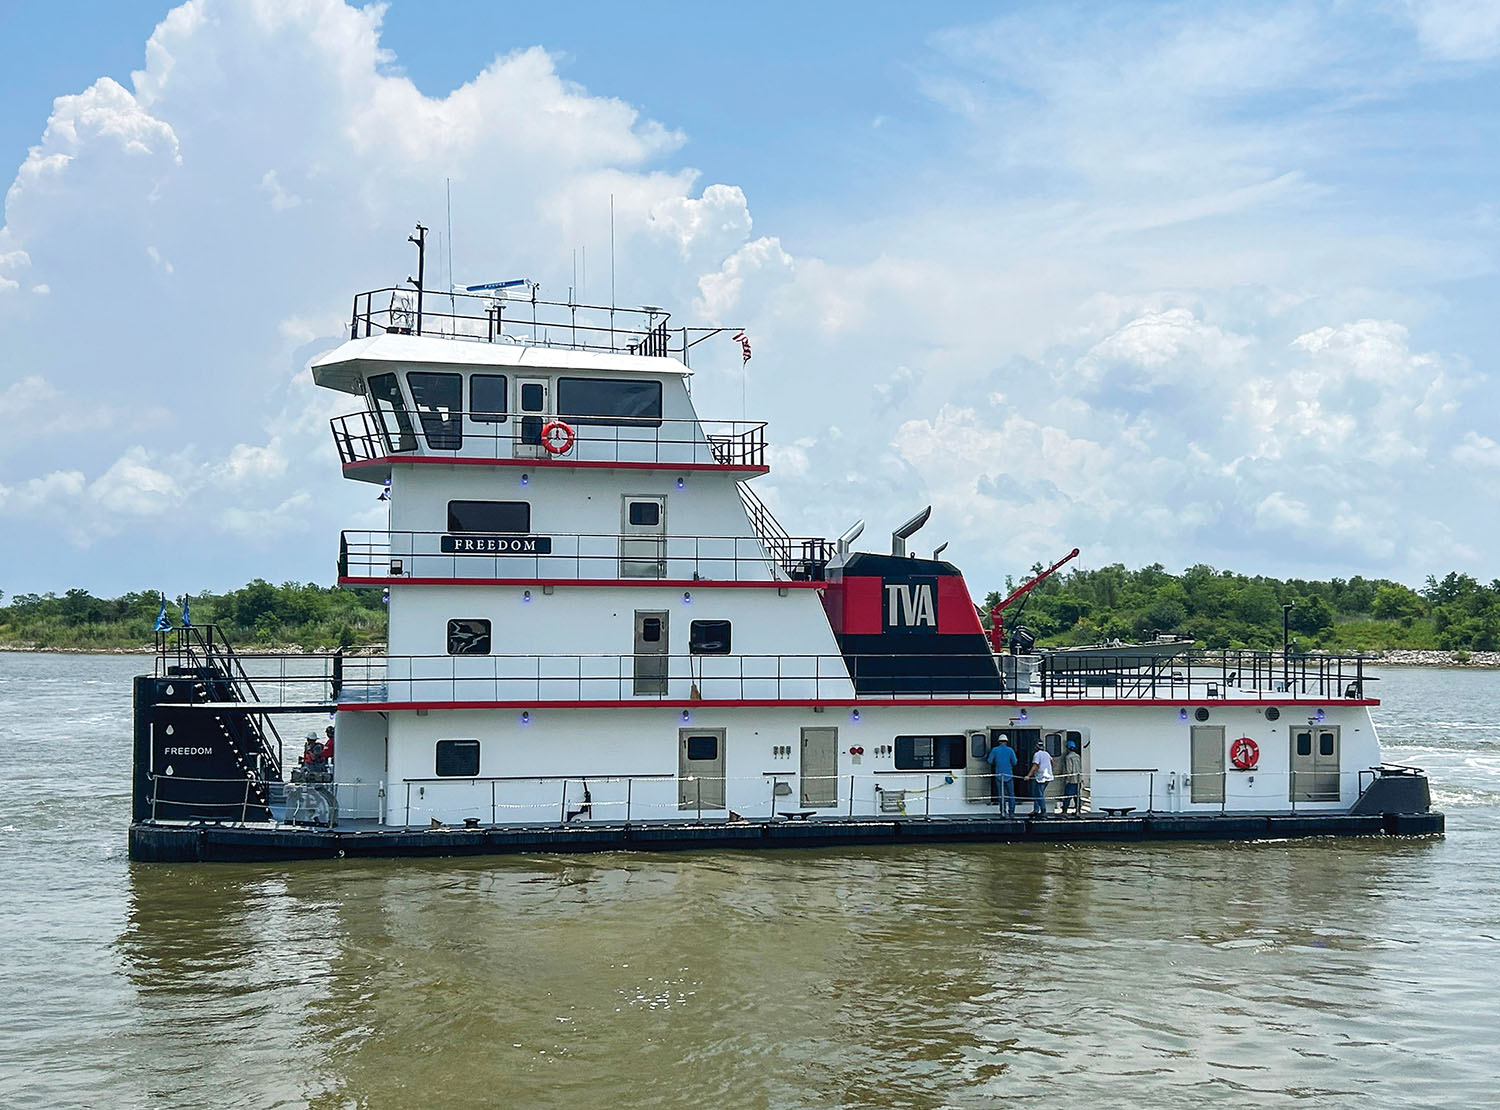 The Tennessee Valley Authority’s 2,682 hp. mv. Freedom is the first Tier 4 towboat owned by a government agency and the first Tier 4 built by Vessel Repair. (Photo courtesy of TVA)